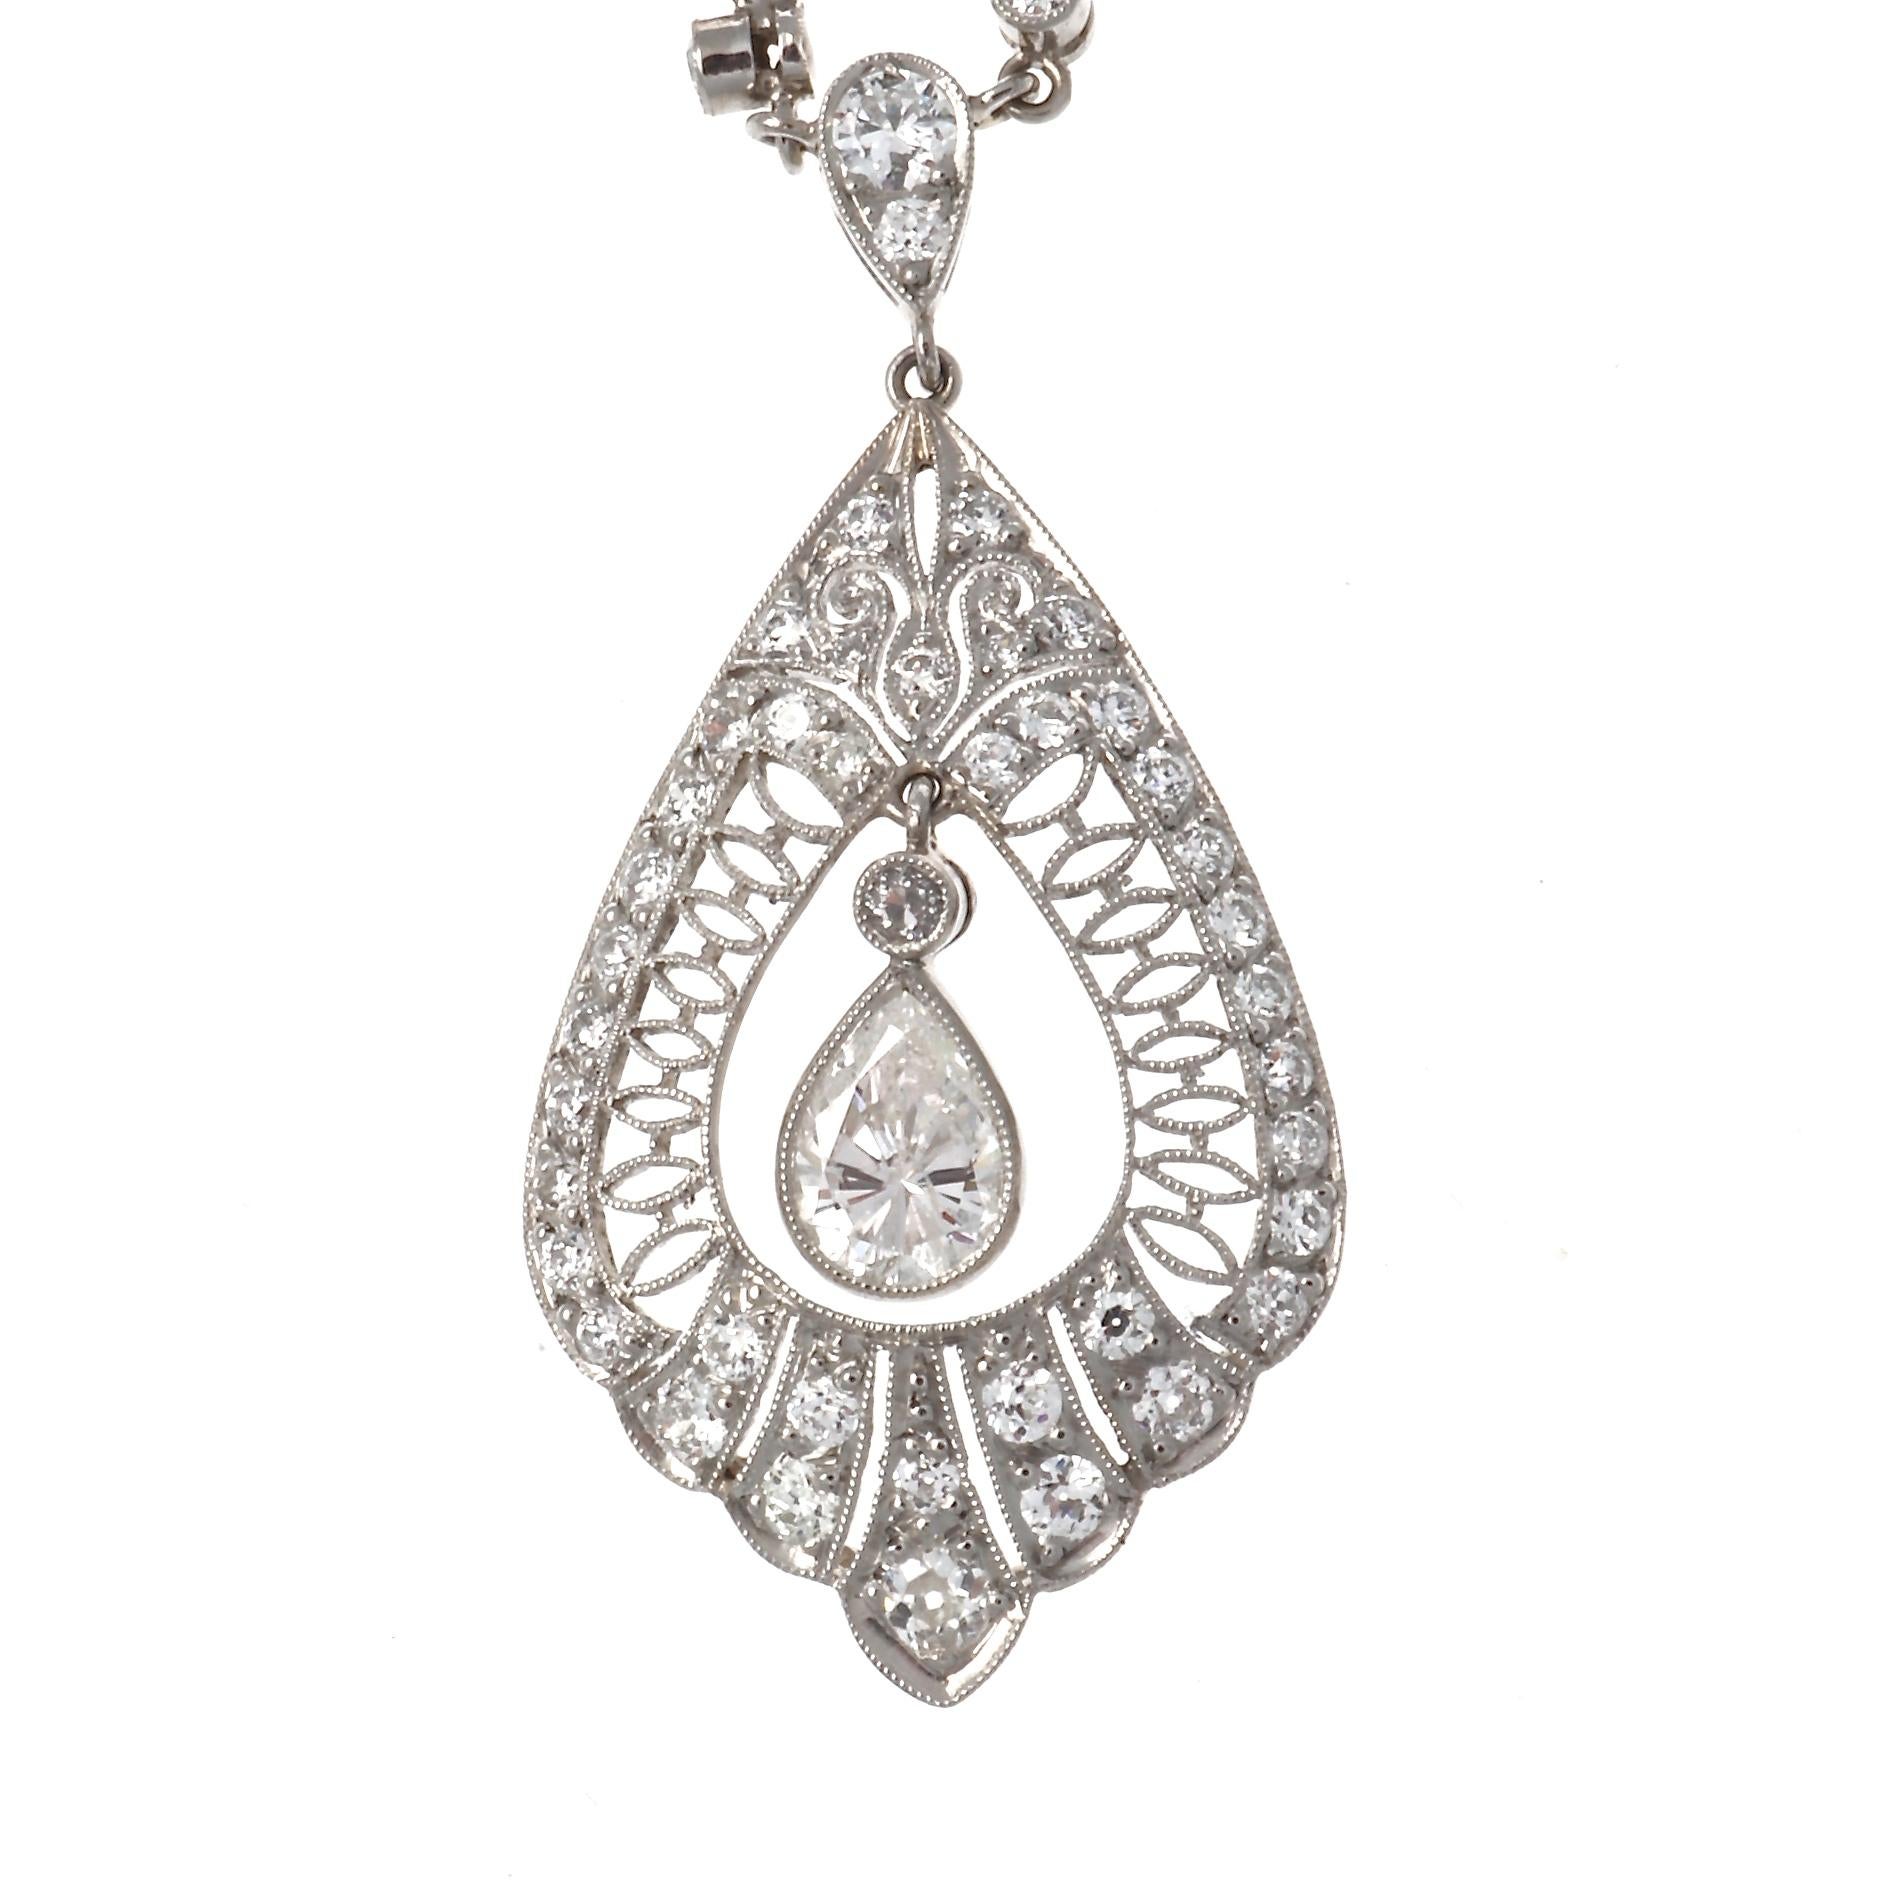 A creation that embellishes the lavish times that were to become known as the Art Deco era and the golden era of jewelry. Featuring a web of platinum that fabulously displays the life of the radiating diamonds. Perfectly placed on a delicate